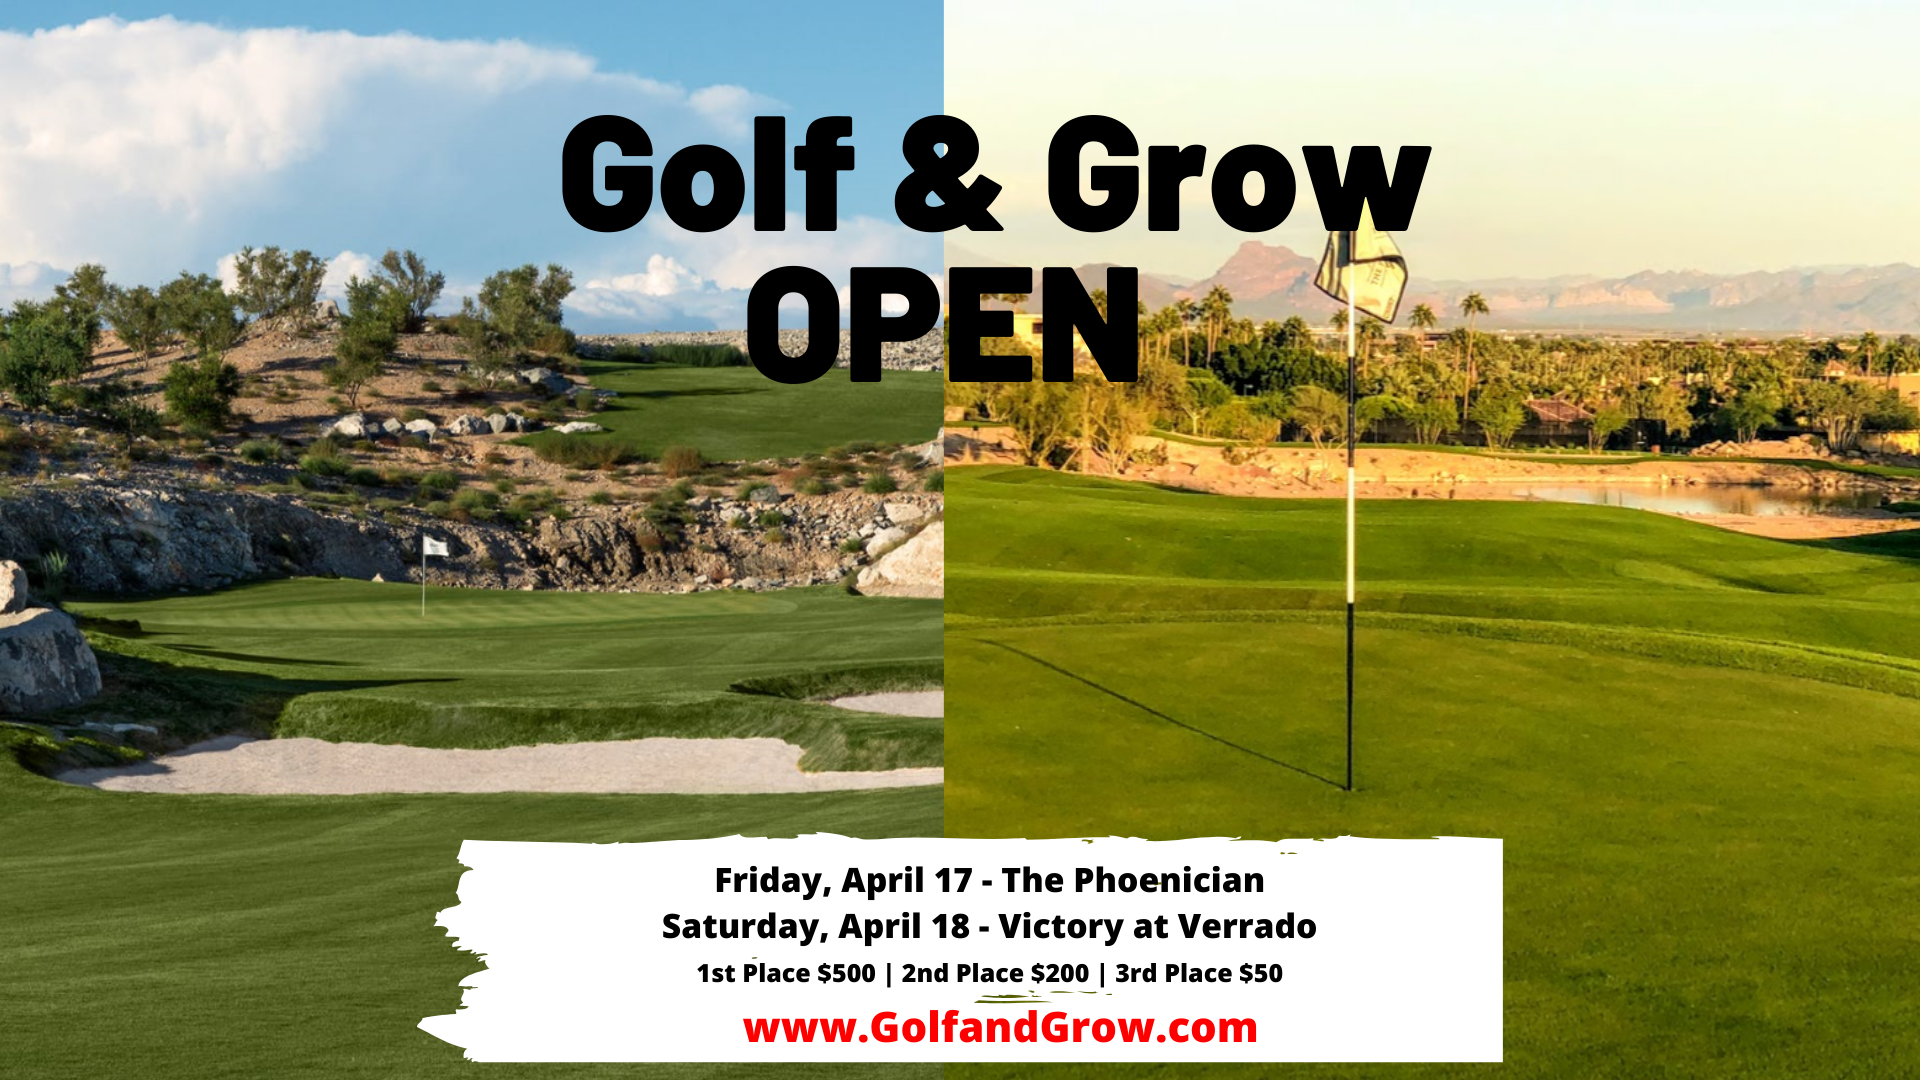 Golf and Grow Open is the best way to test golf skills at two iconic courses in az 